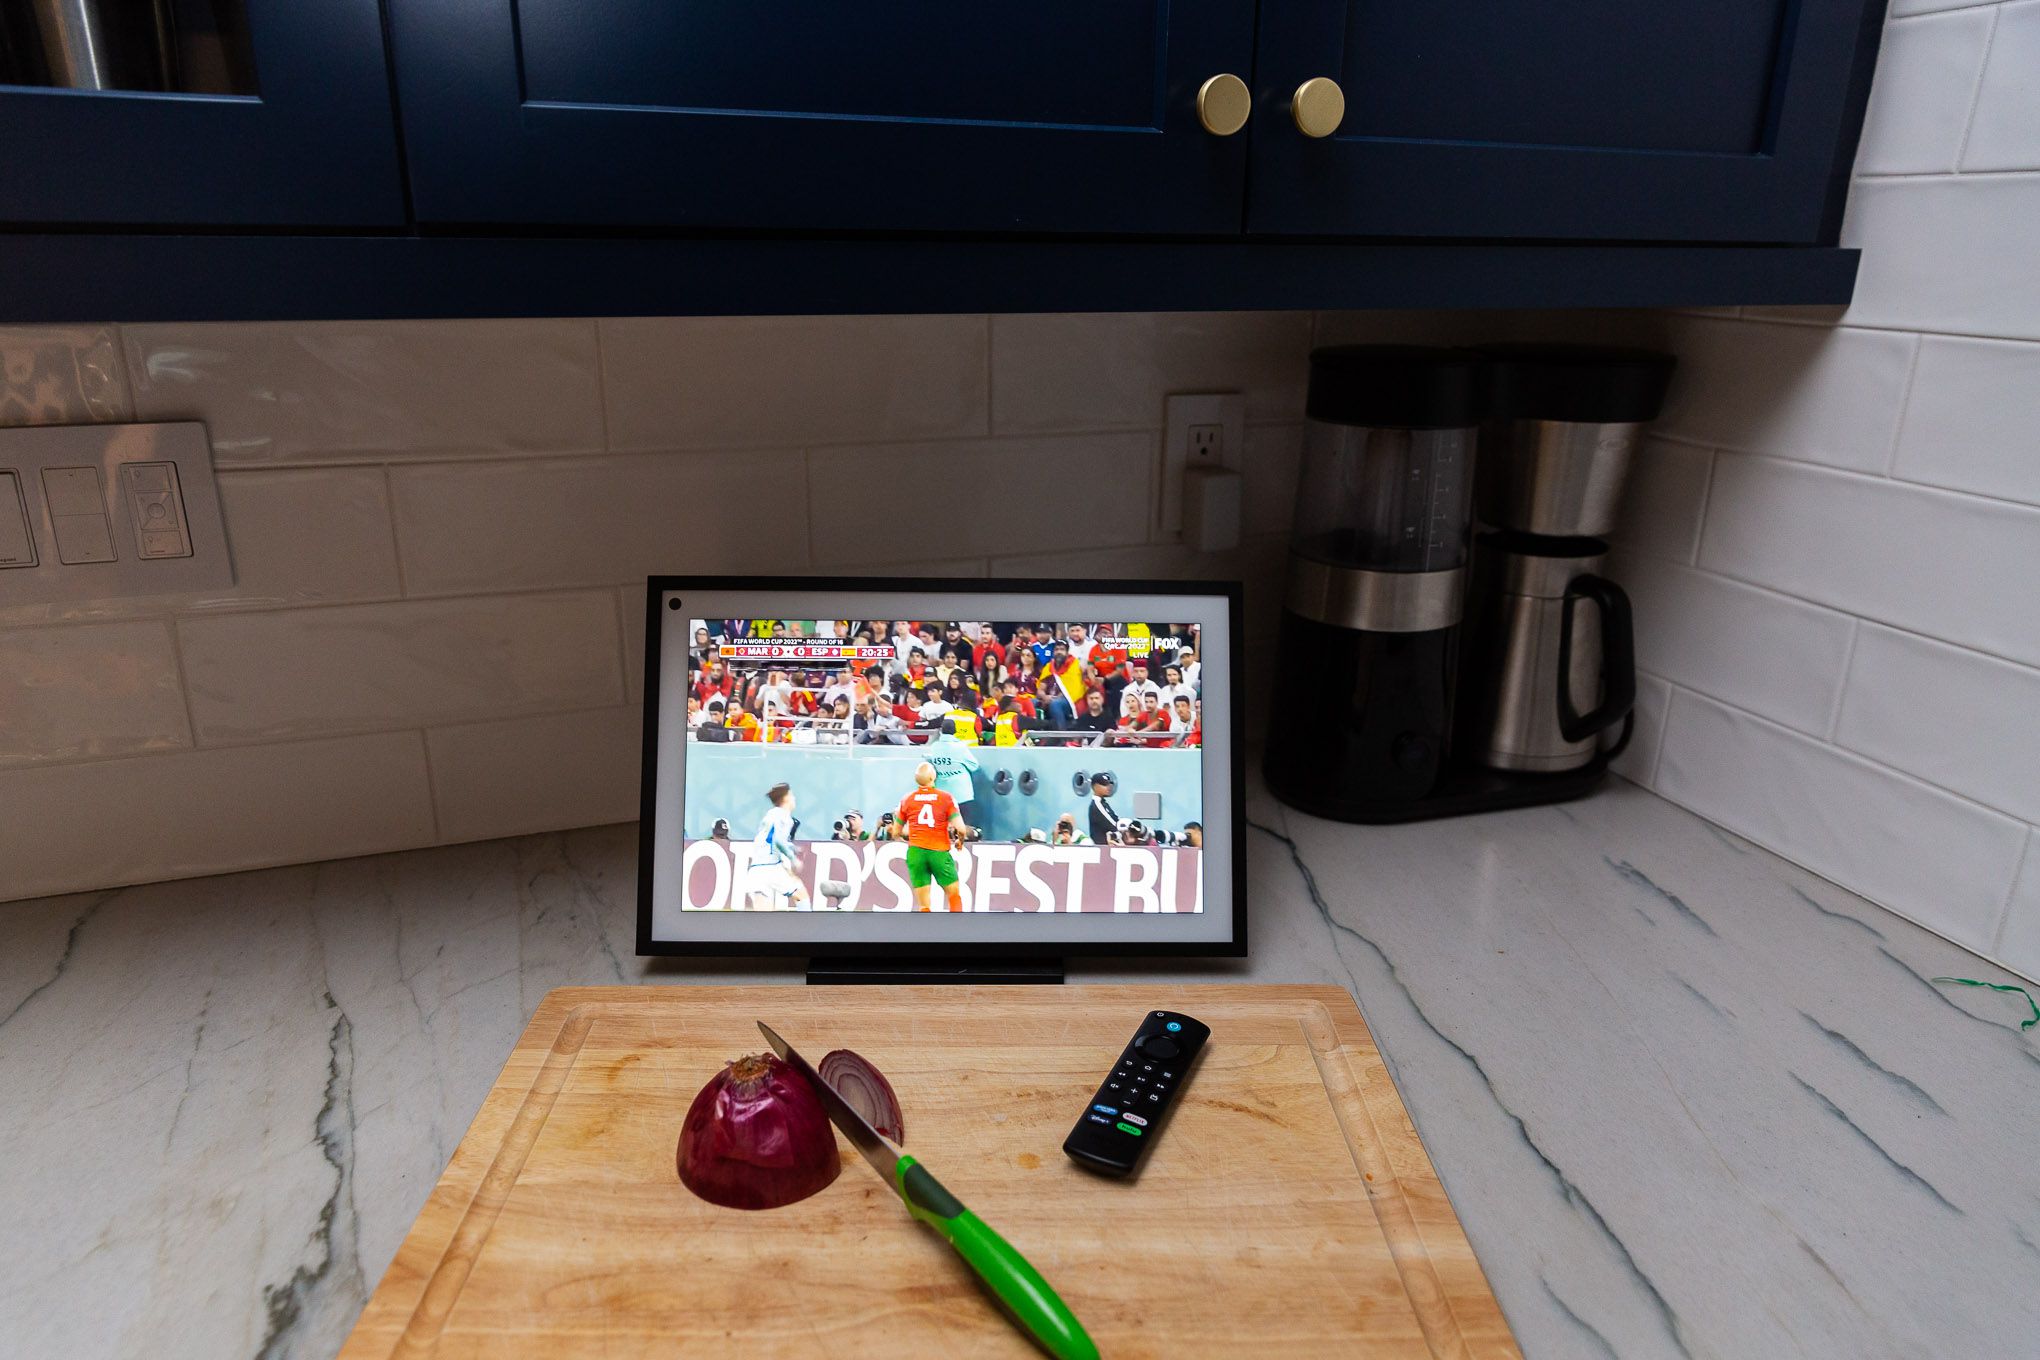 Using a tilt stand (sold separately), I could keep up with the World Cup on YouTubeTV while working in the kitchen.